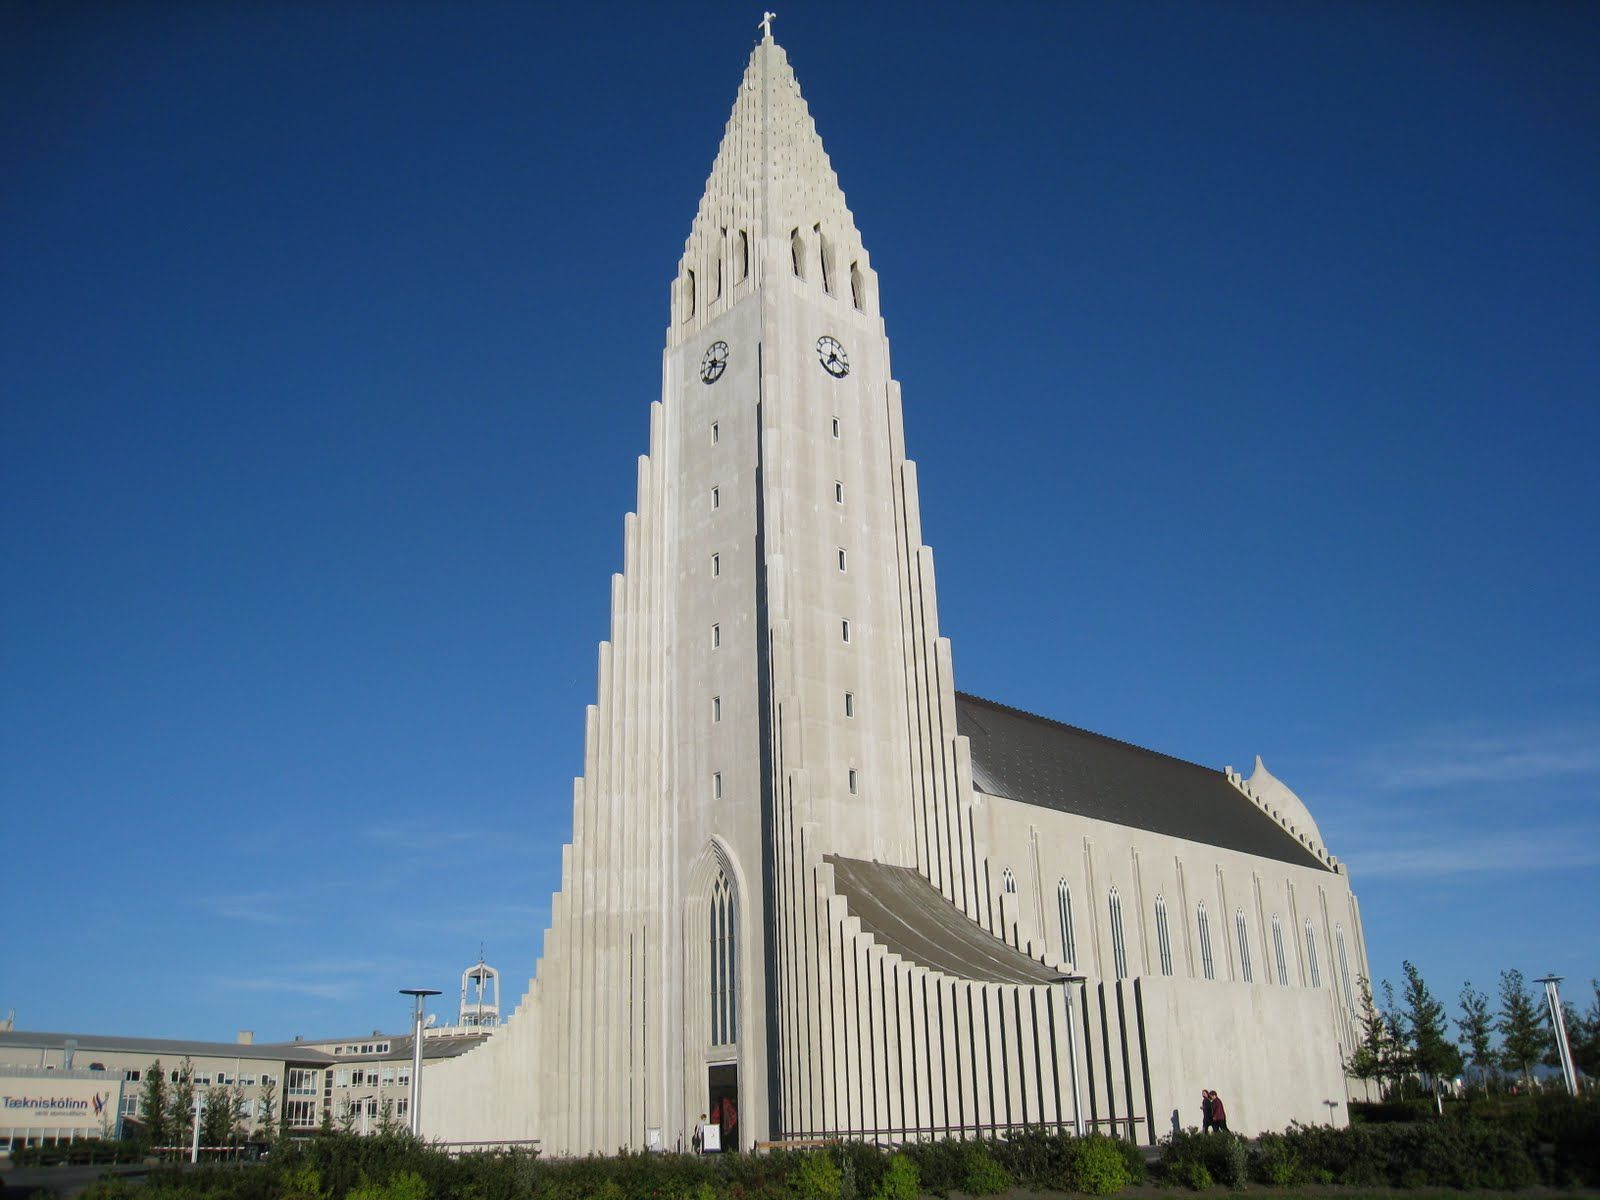 Wallpaper of church of iceland | Favorite Architecture | Pinterest ...